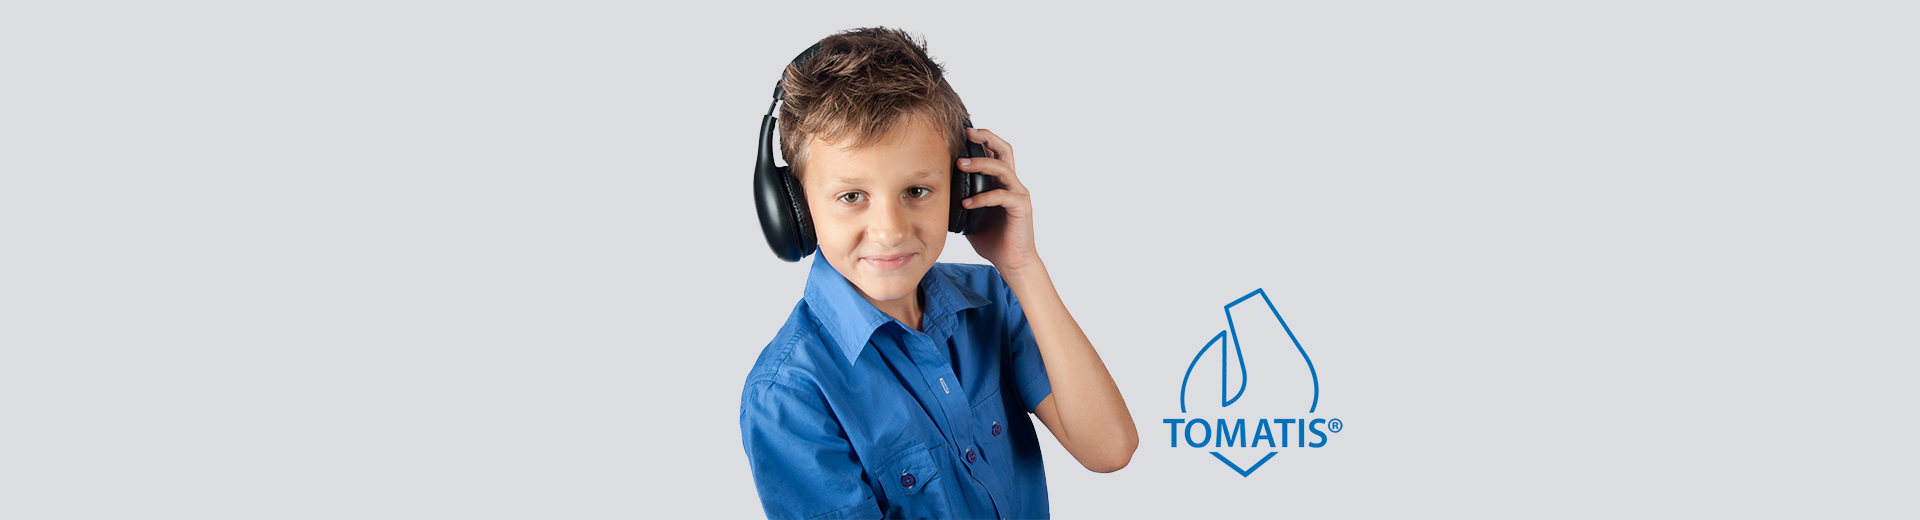 Tomatis Sound Therapy Banner - TLC